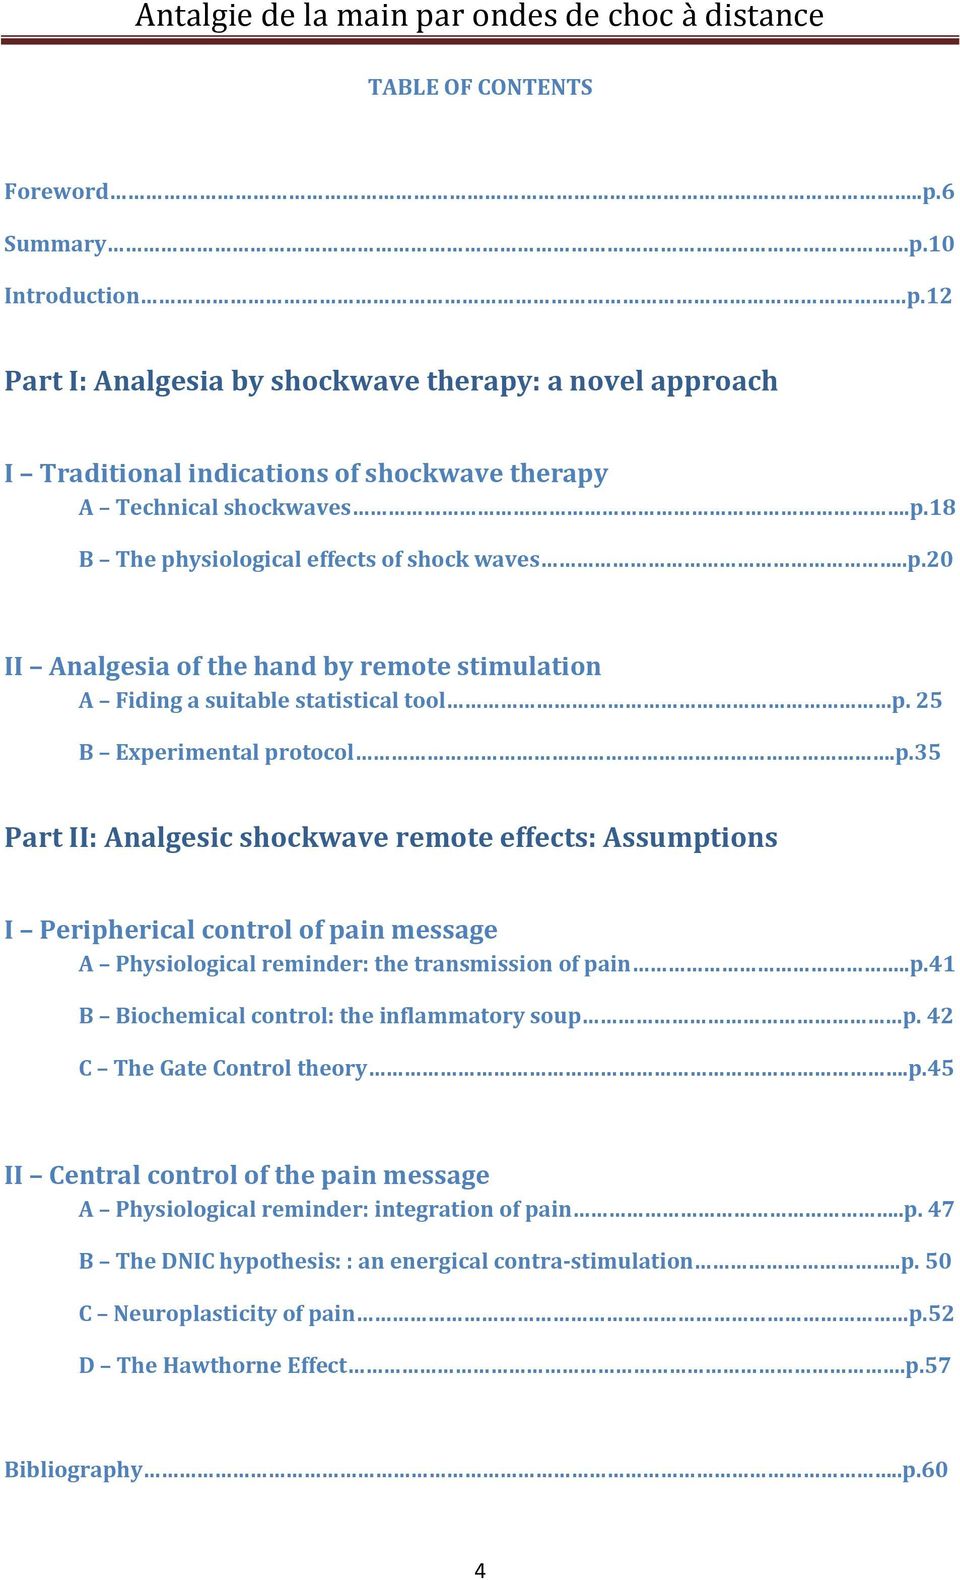 .p.41 B Biochemical control: the inflammatory soup p. 42 C The Gate Control theory.p.45 II Central control of the pain message A Physiological reminder: integration of pain..p. 47 B The DNIC hypothesis: : an energical contra-stimulation.